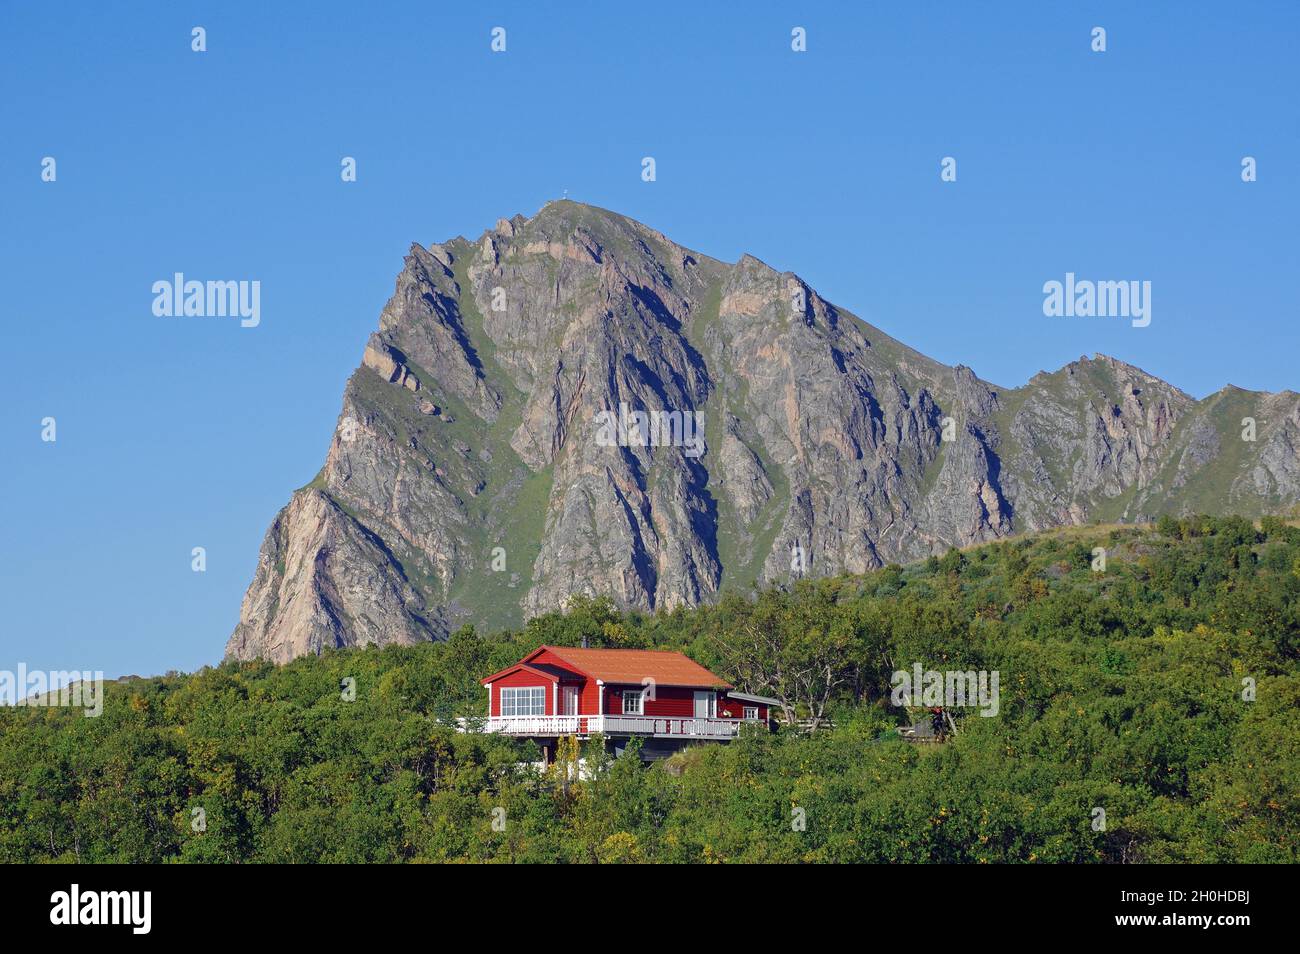 Lonely holiday home in front of rugged mountains, green landscape, Vesteralen, Bleik, Andoya, Scandinavia, Norway Stock Photo